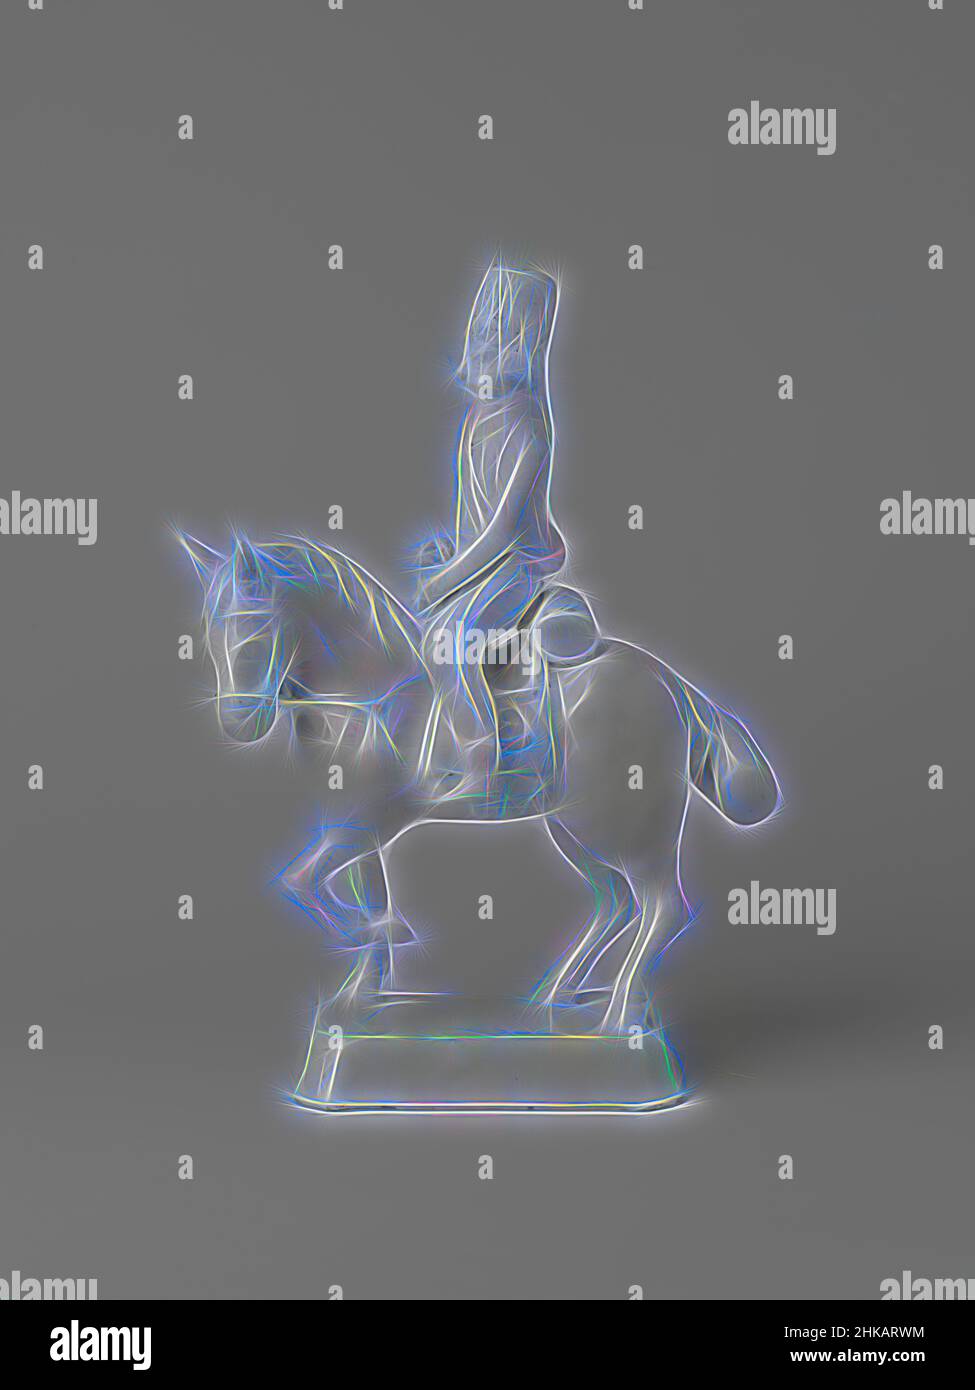 Inspired by Horse with rider, Horseman of undecorated faience. The horse stands on a rectangular base and the rider sits loose on it. The rider wears a bereb hat and a German uniform from the second half of the 18th century. The horse has its left foreleg raised. The rider is accompanied by an, Reimagined by Artotop. Classic art reinvented with a modern twist. Design of warm cheerful glowing of brightness and light ray radiance. Photography inspired by surrealism and futurism, embracing dynamic energy of modern technology, movement, speed and revolutionize culture Stock Photo